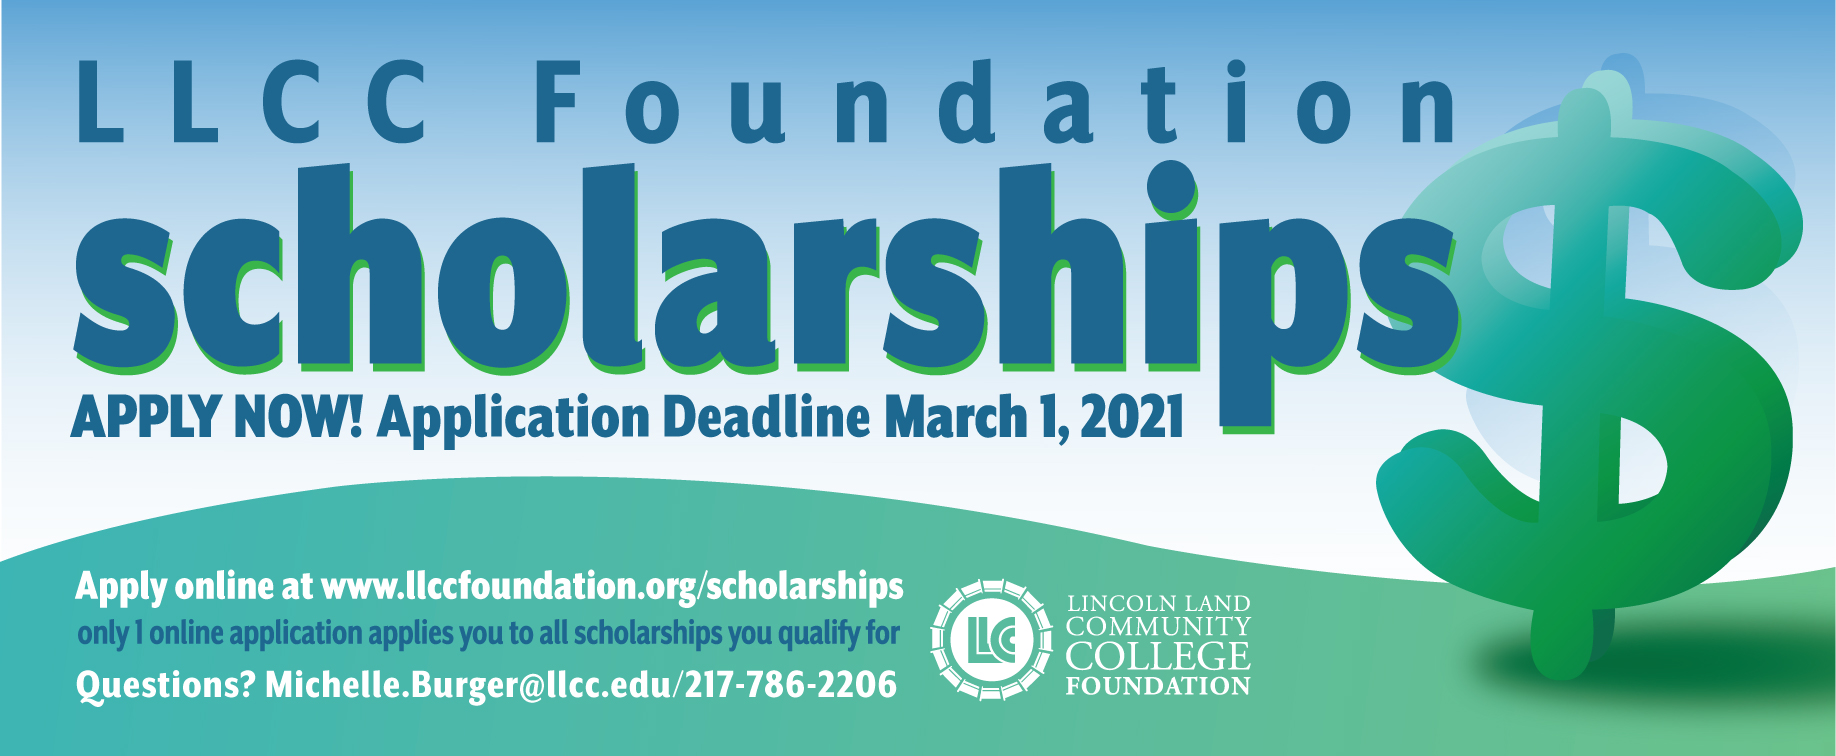 LLCC Foundation scholarships. Apply now! Application deadline March 1, 2021. Apply online at www.llccfoundation.org/scholarships. Only 1 online application applies you to all scholarships you qualify for. Questions? Michelle.Burger@llcc.edu / 217-786-2206. LLCC. Lincoln Land Community College Foundation.